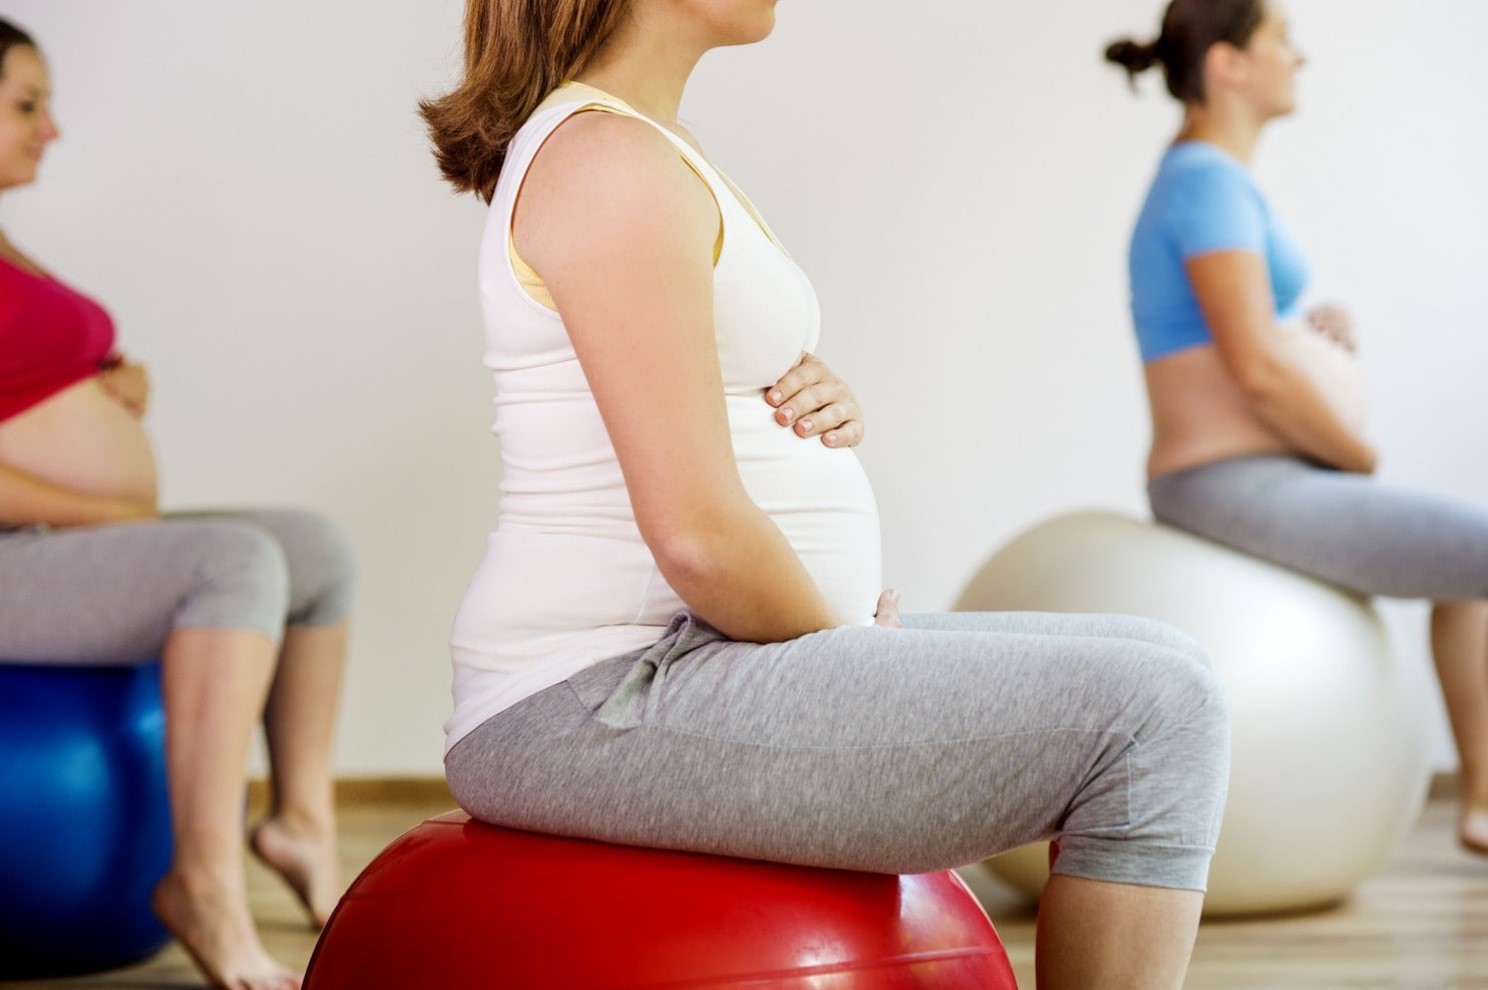 🌟 Easy and Home EXERCISES for PREGNANT WOMEN 🏡 Pilates BALL 🤰 PELVIC  FLOOR and PERINEUM at LABOR 